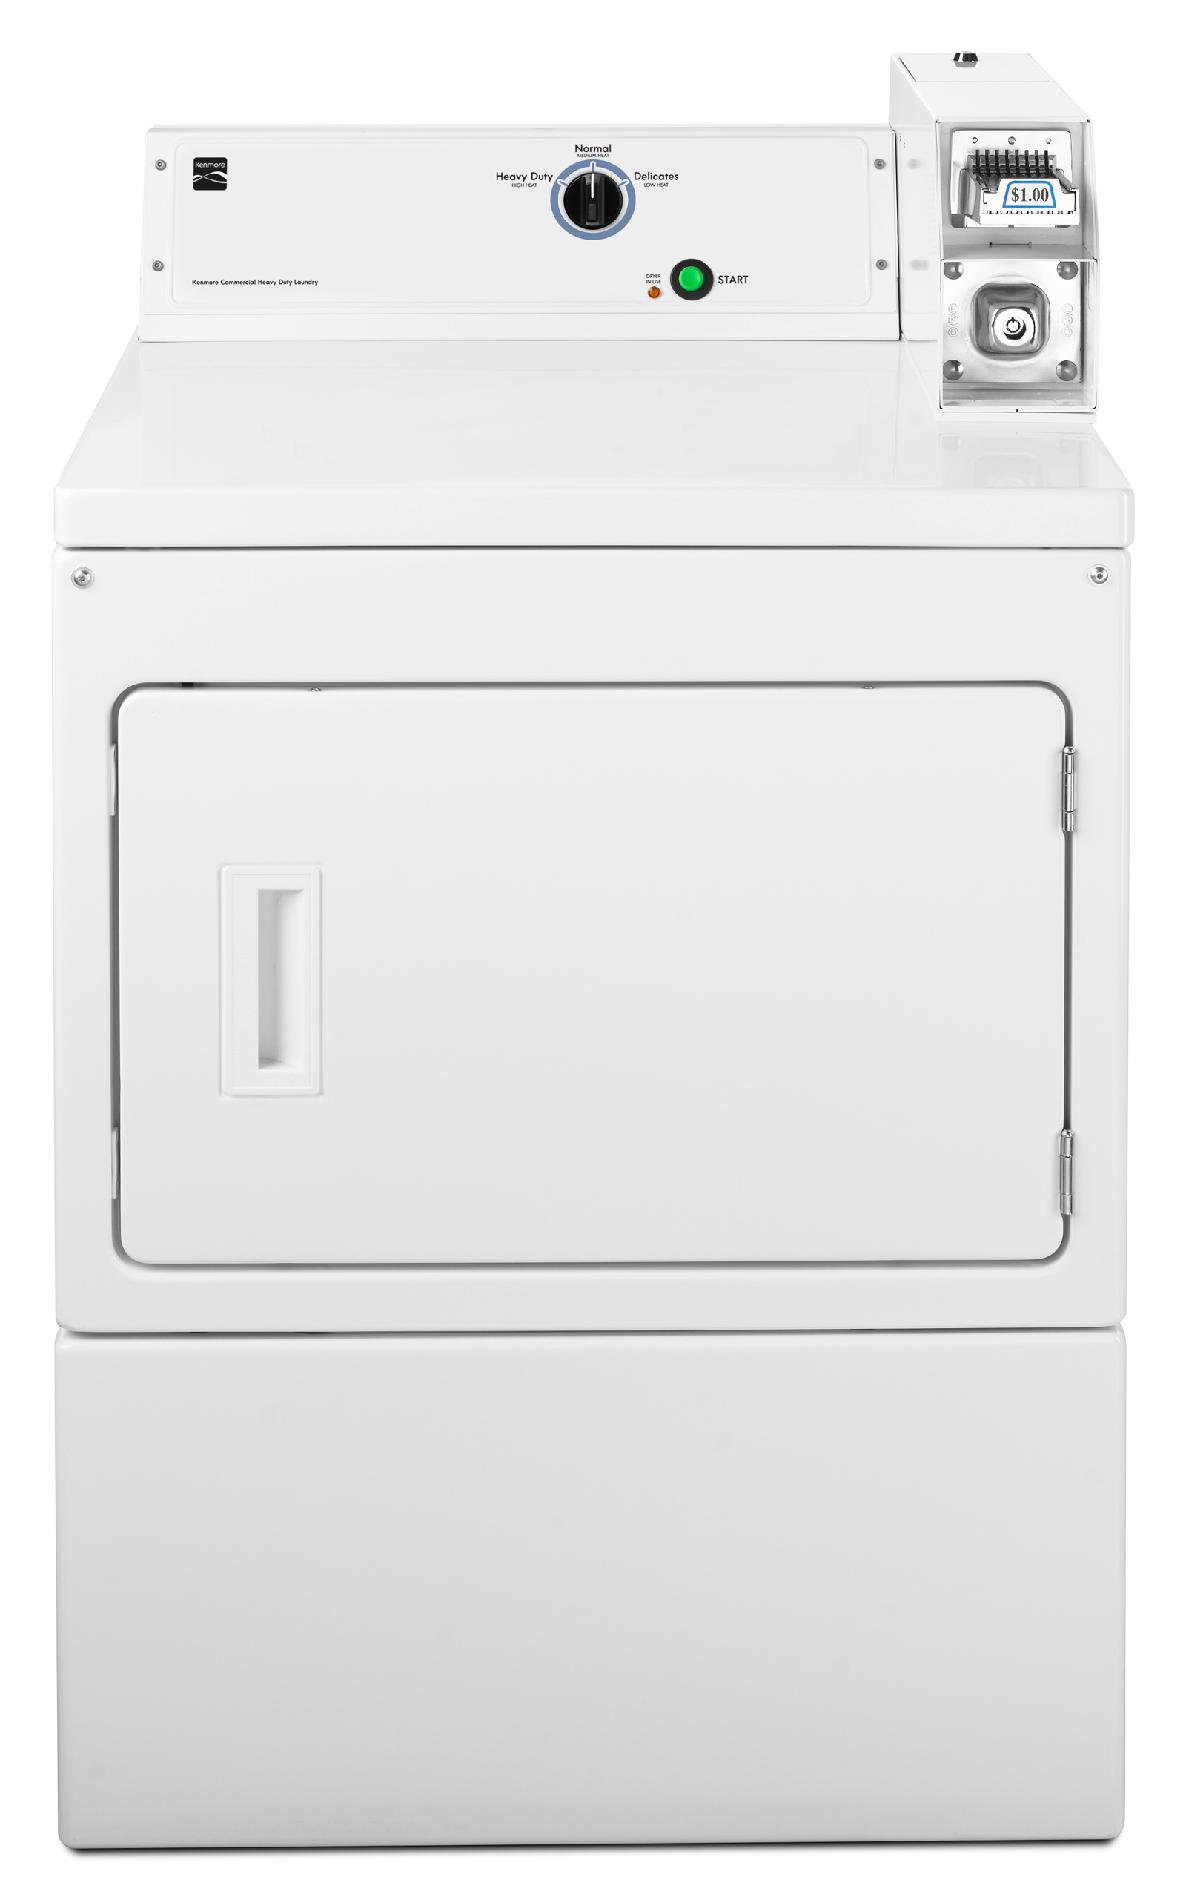 Kenmore 7.4 cu. ft. Coin-Operated Electric Dryer - White 7.0 cu. ft. and greater